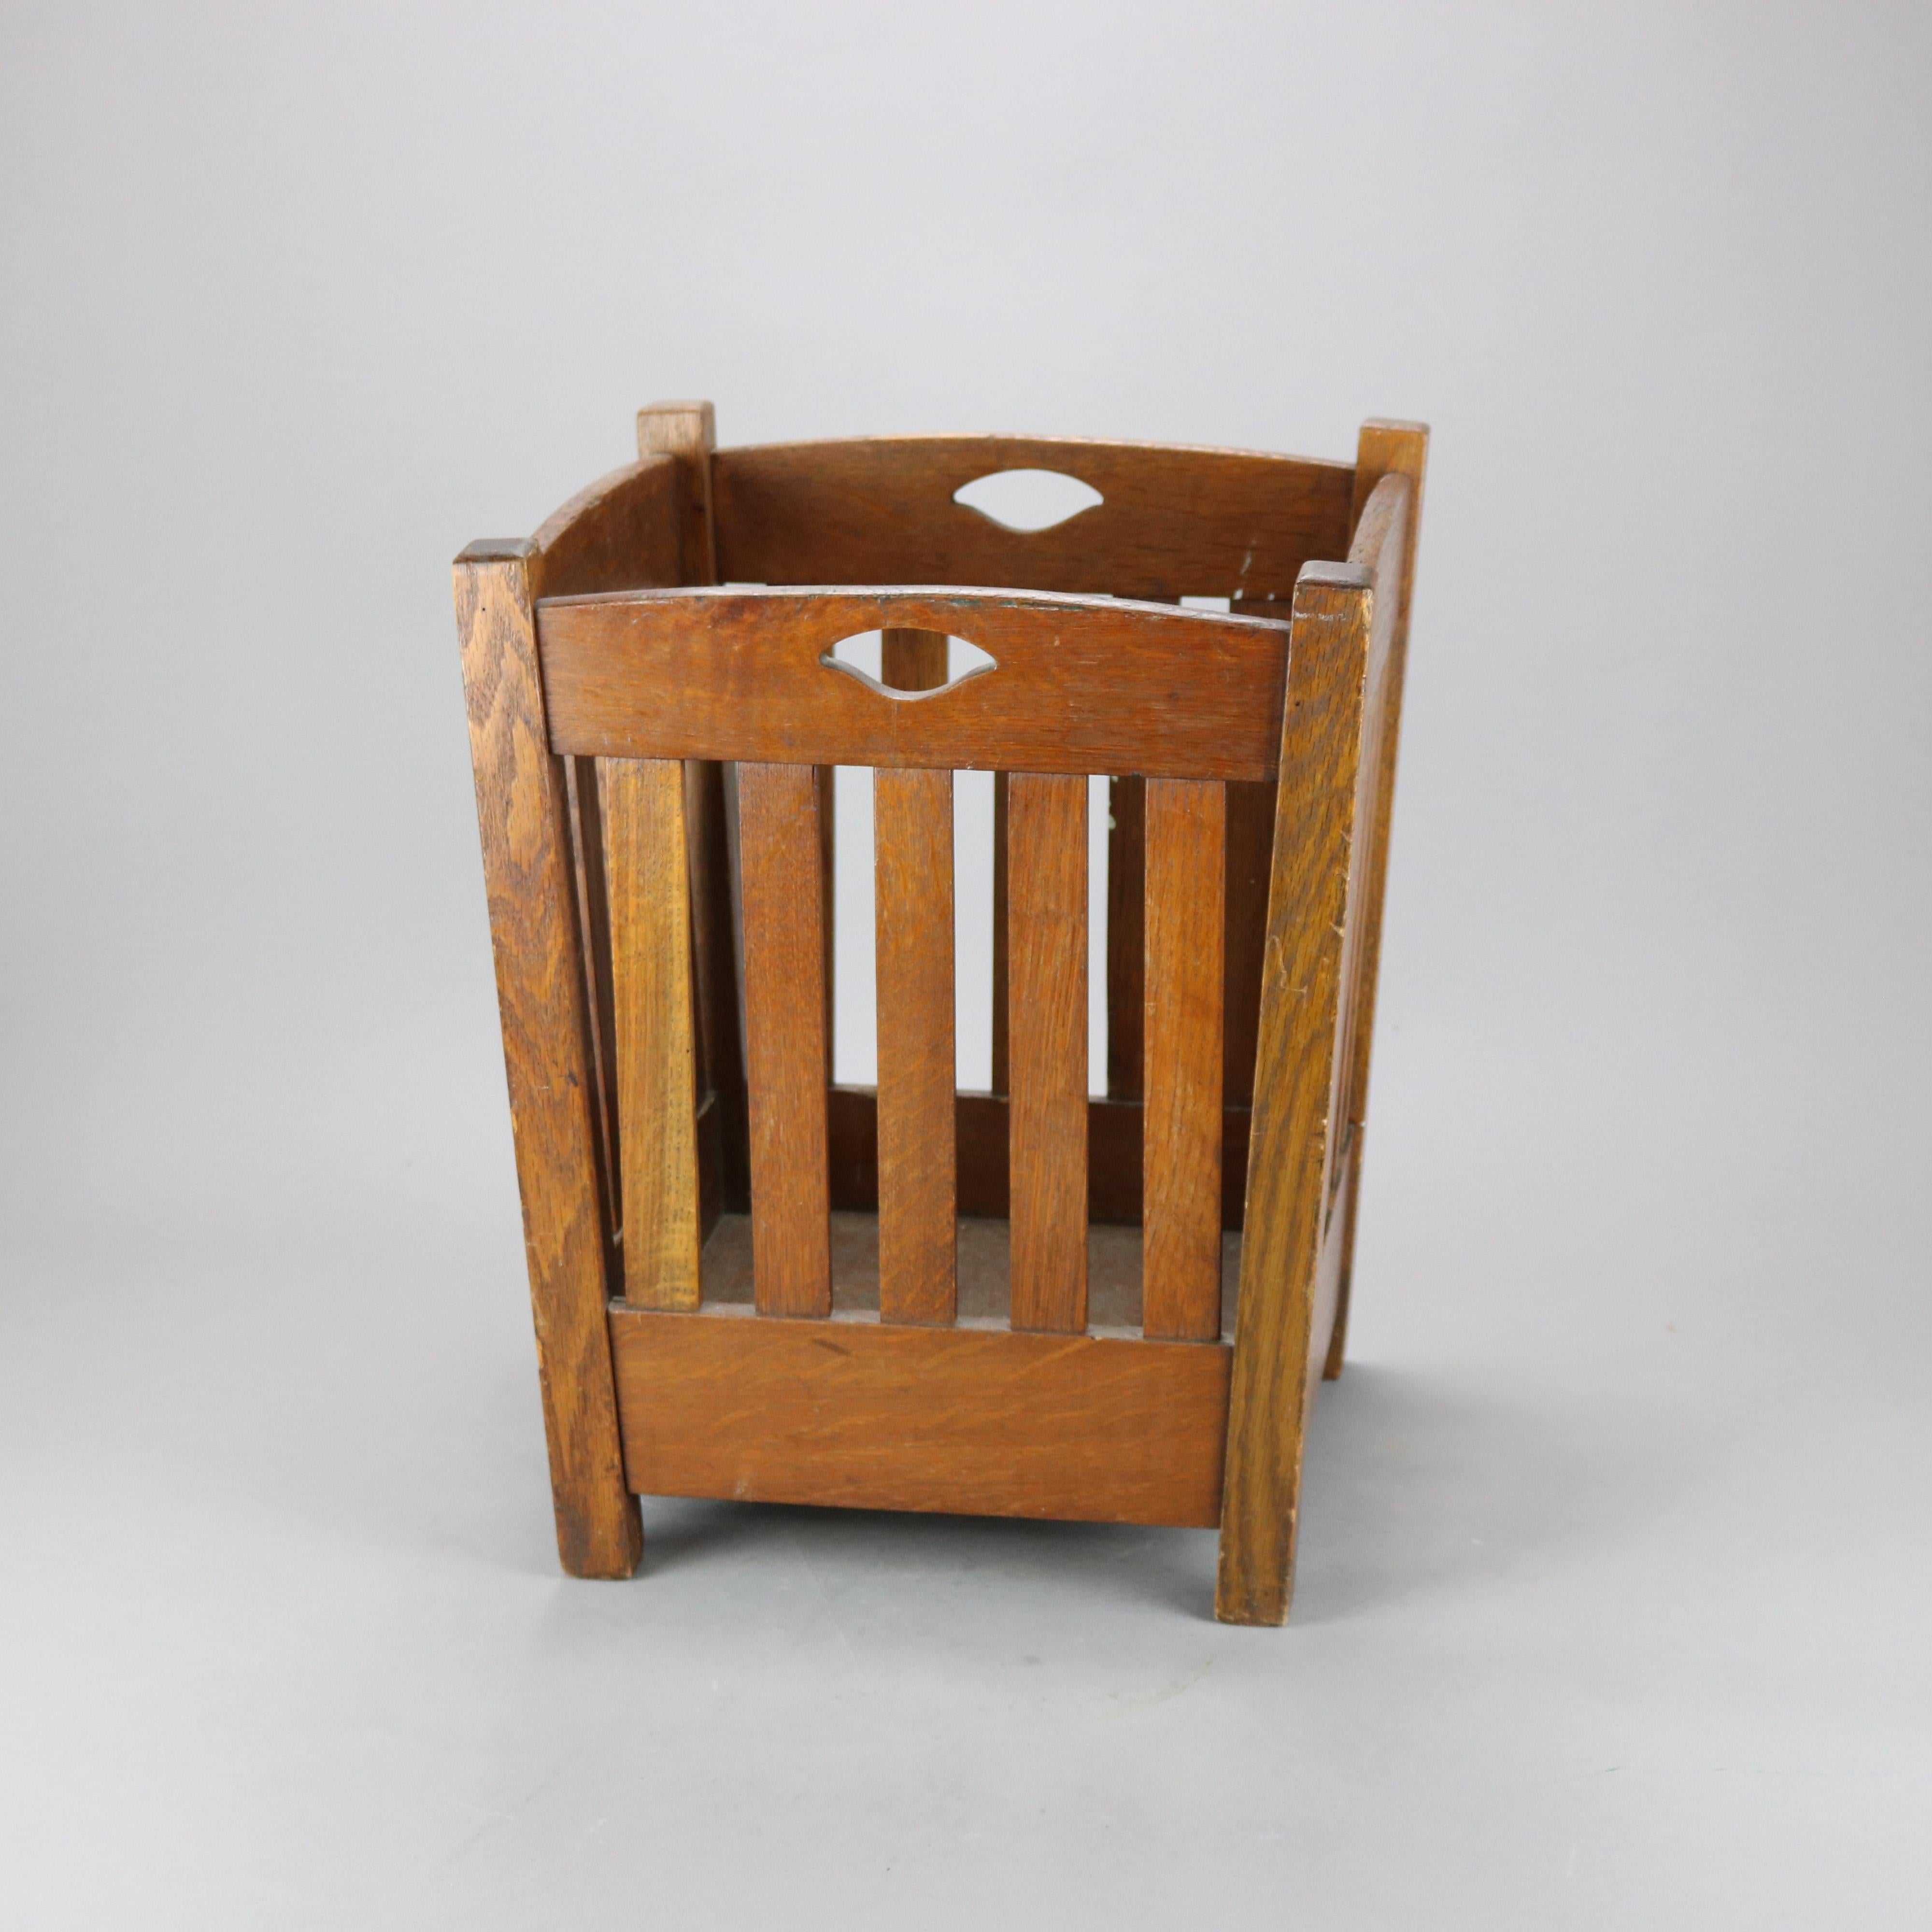 An antique Arts & Crafts waste basket by Stickley Bros, Catalog #101-30, offers oak construction with cutout handles and flared slat sides, c1910

Measures - 17.75'' H x 14.25'' W x 14.25'' D.